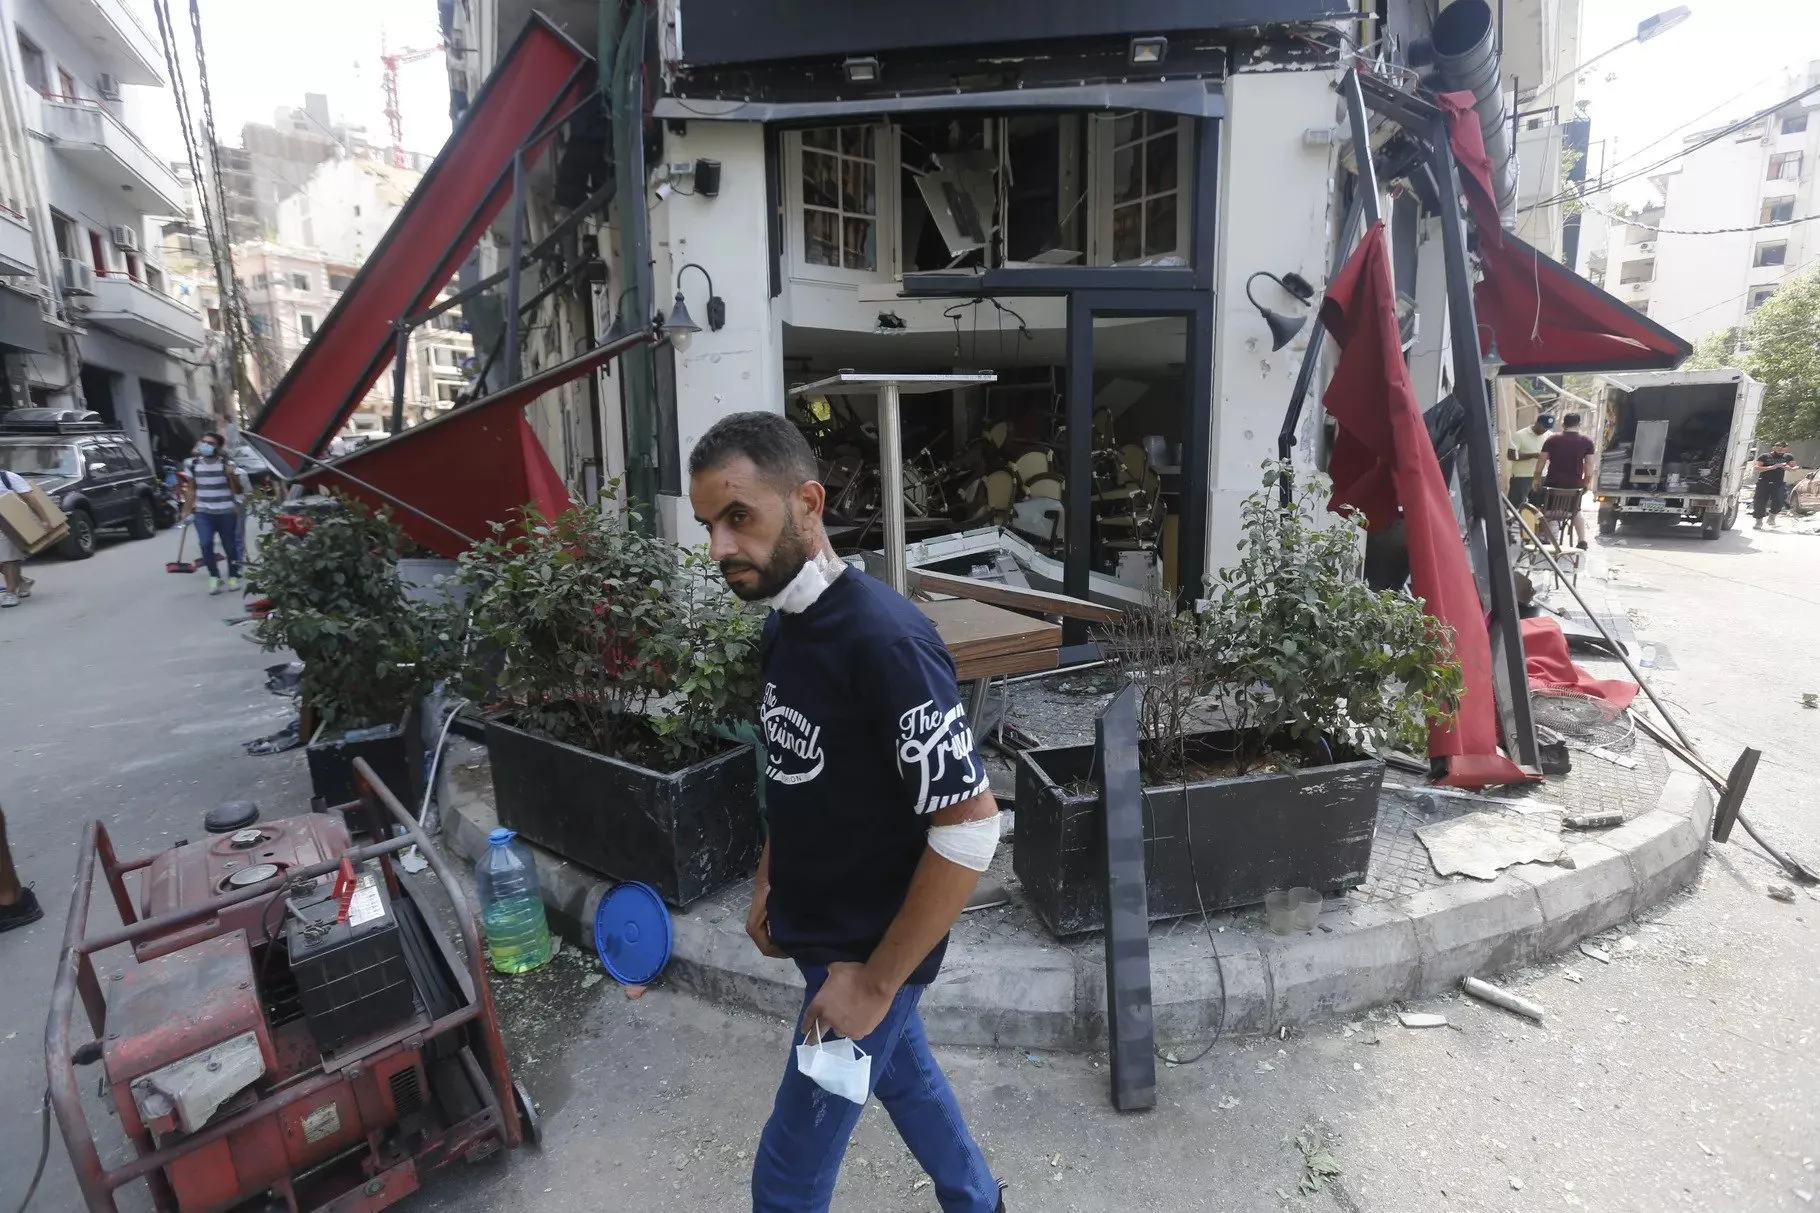 A man walks by a restaurant, heavily damaged by Tuesday’s explosion, on August 6, 2020, in Beirut, Lebanon. Marwan Tahtah/Getty Images